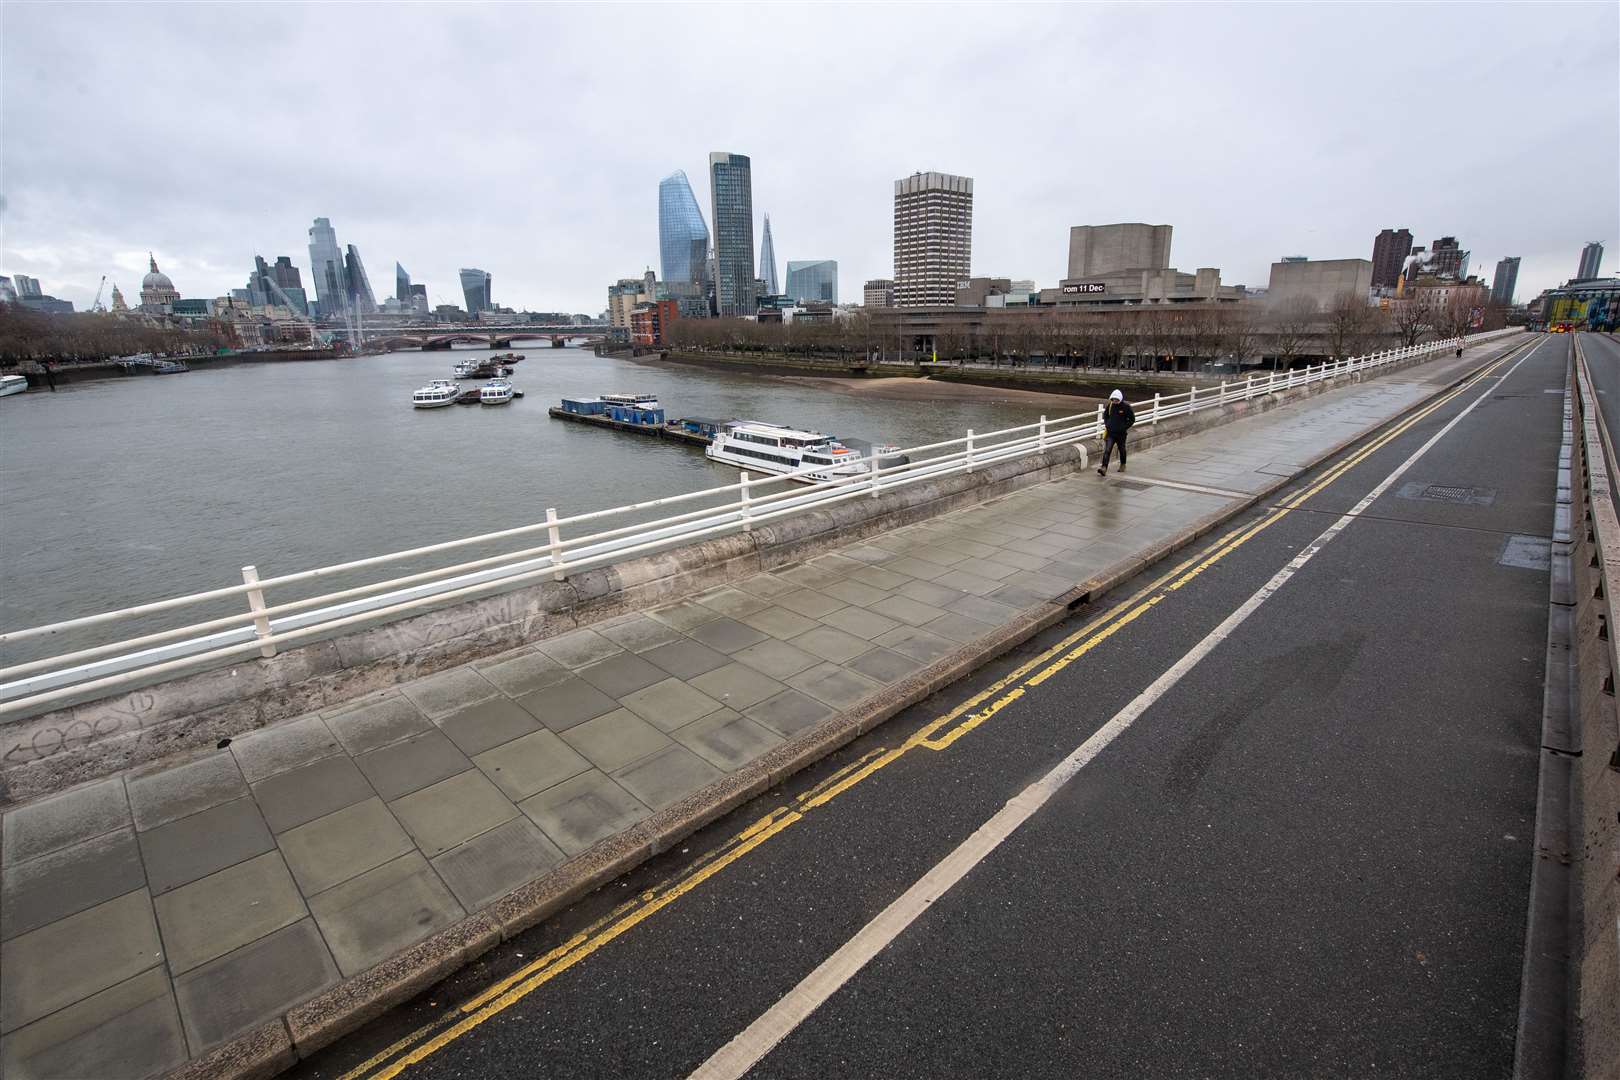 This man was the only soul to be seen on Waterloo Bridge in central London (Dominic Lipinski/PA)